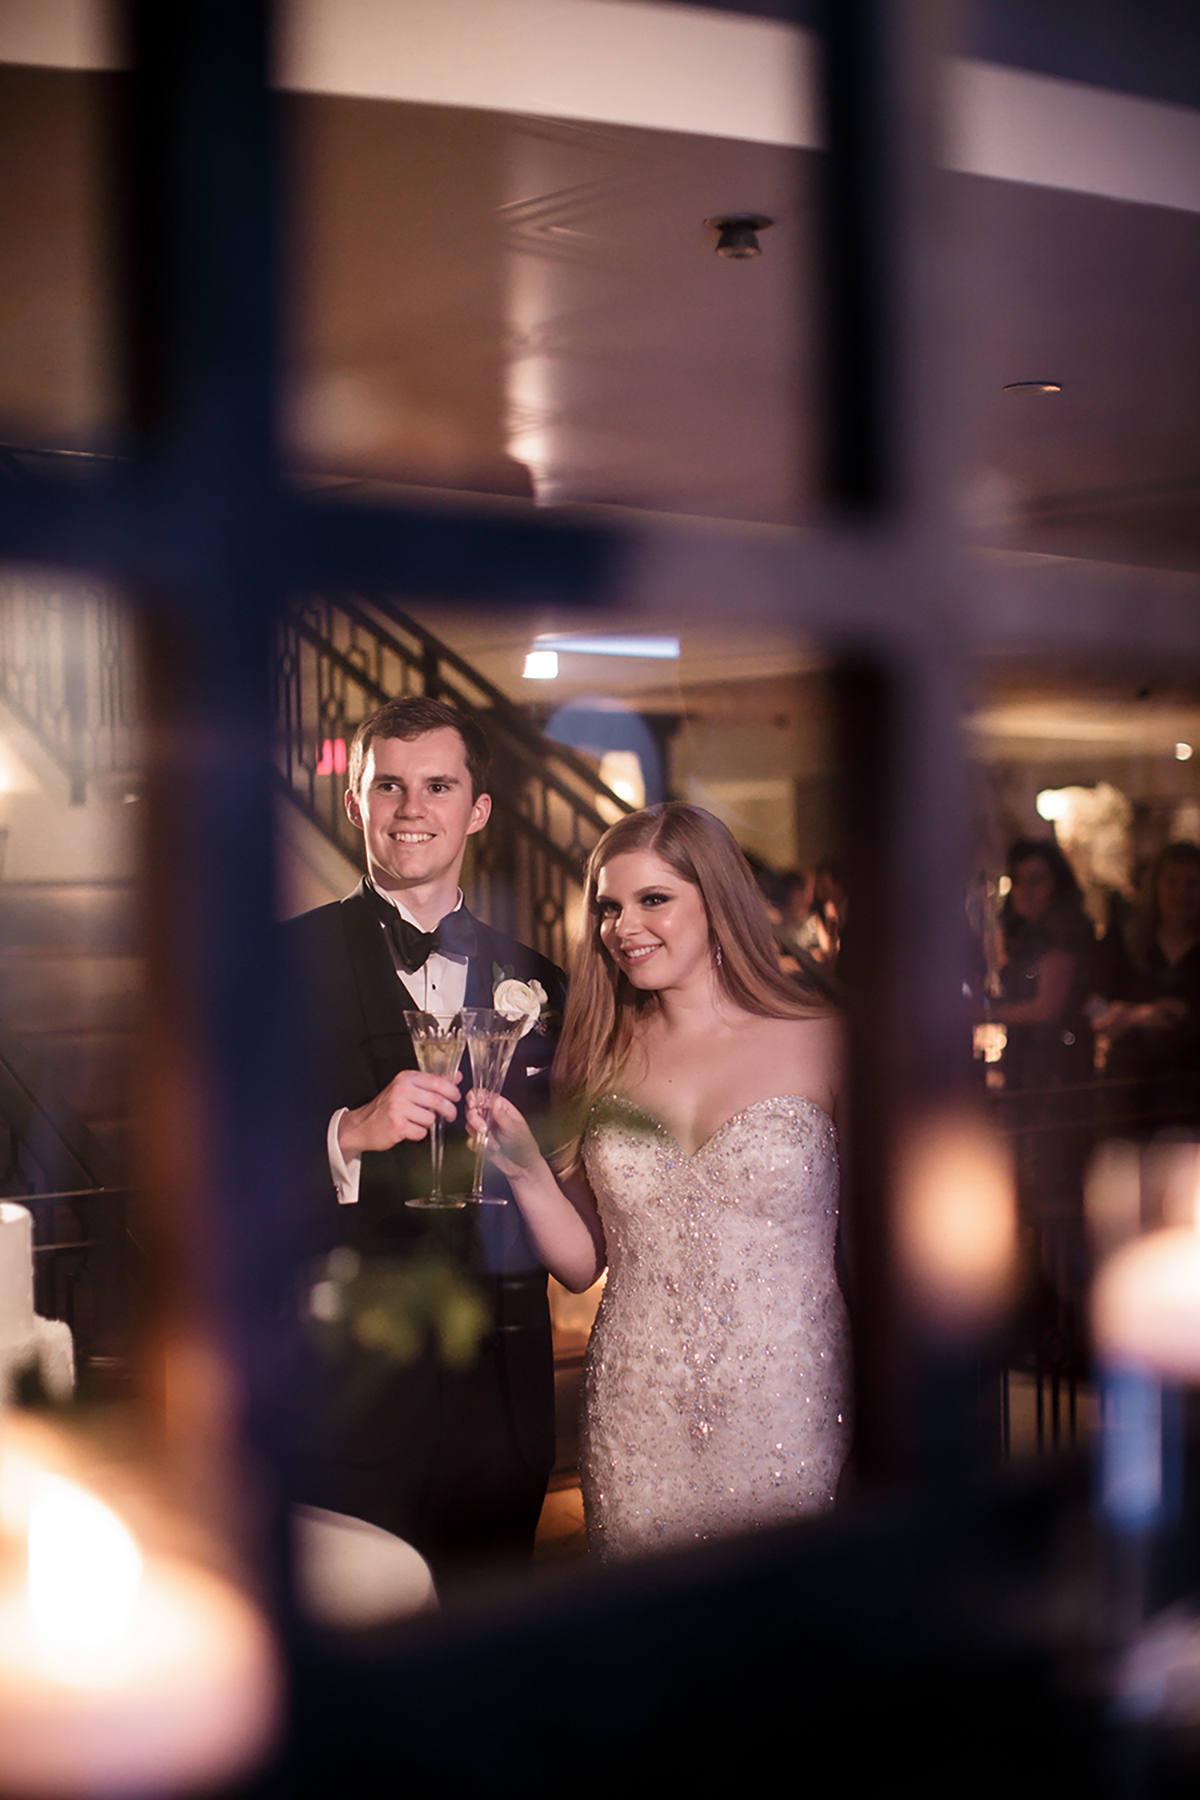 cute moments to capture during the wedding - the toasts